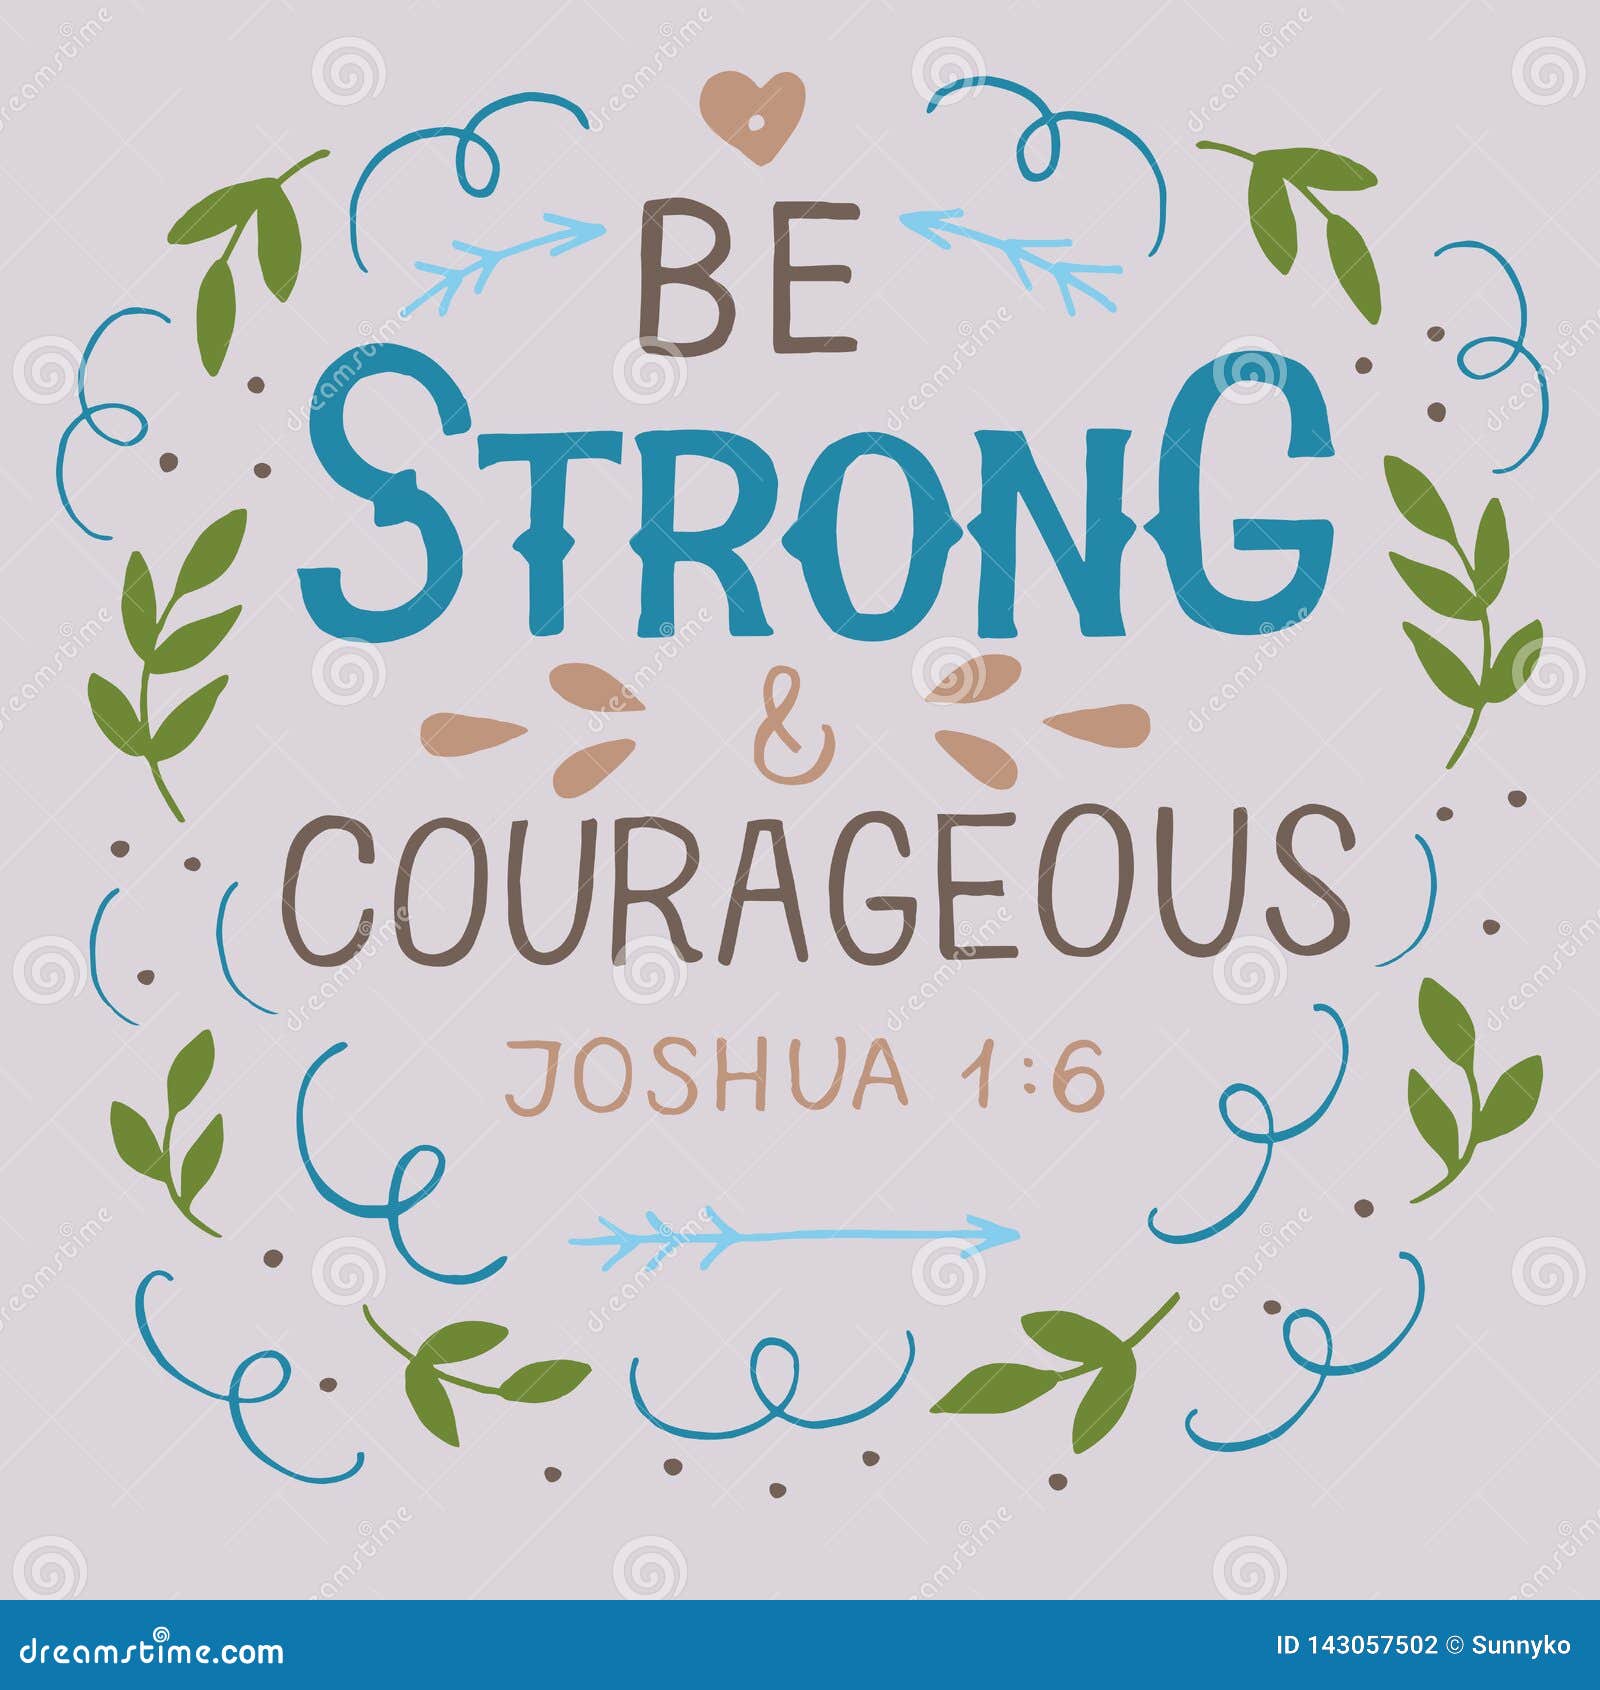 be strong and courageous quotes bible